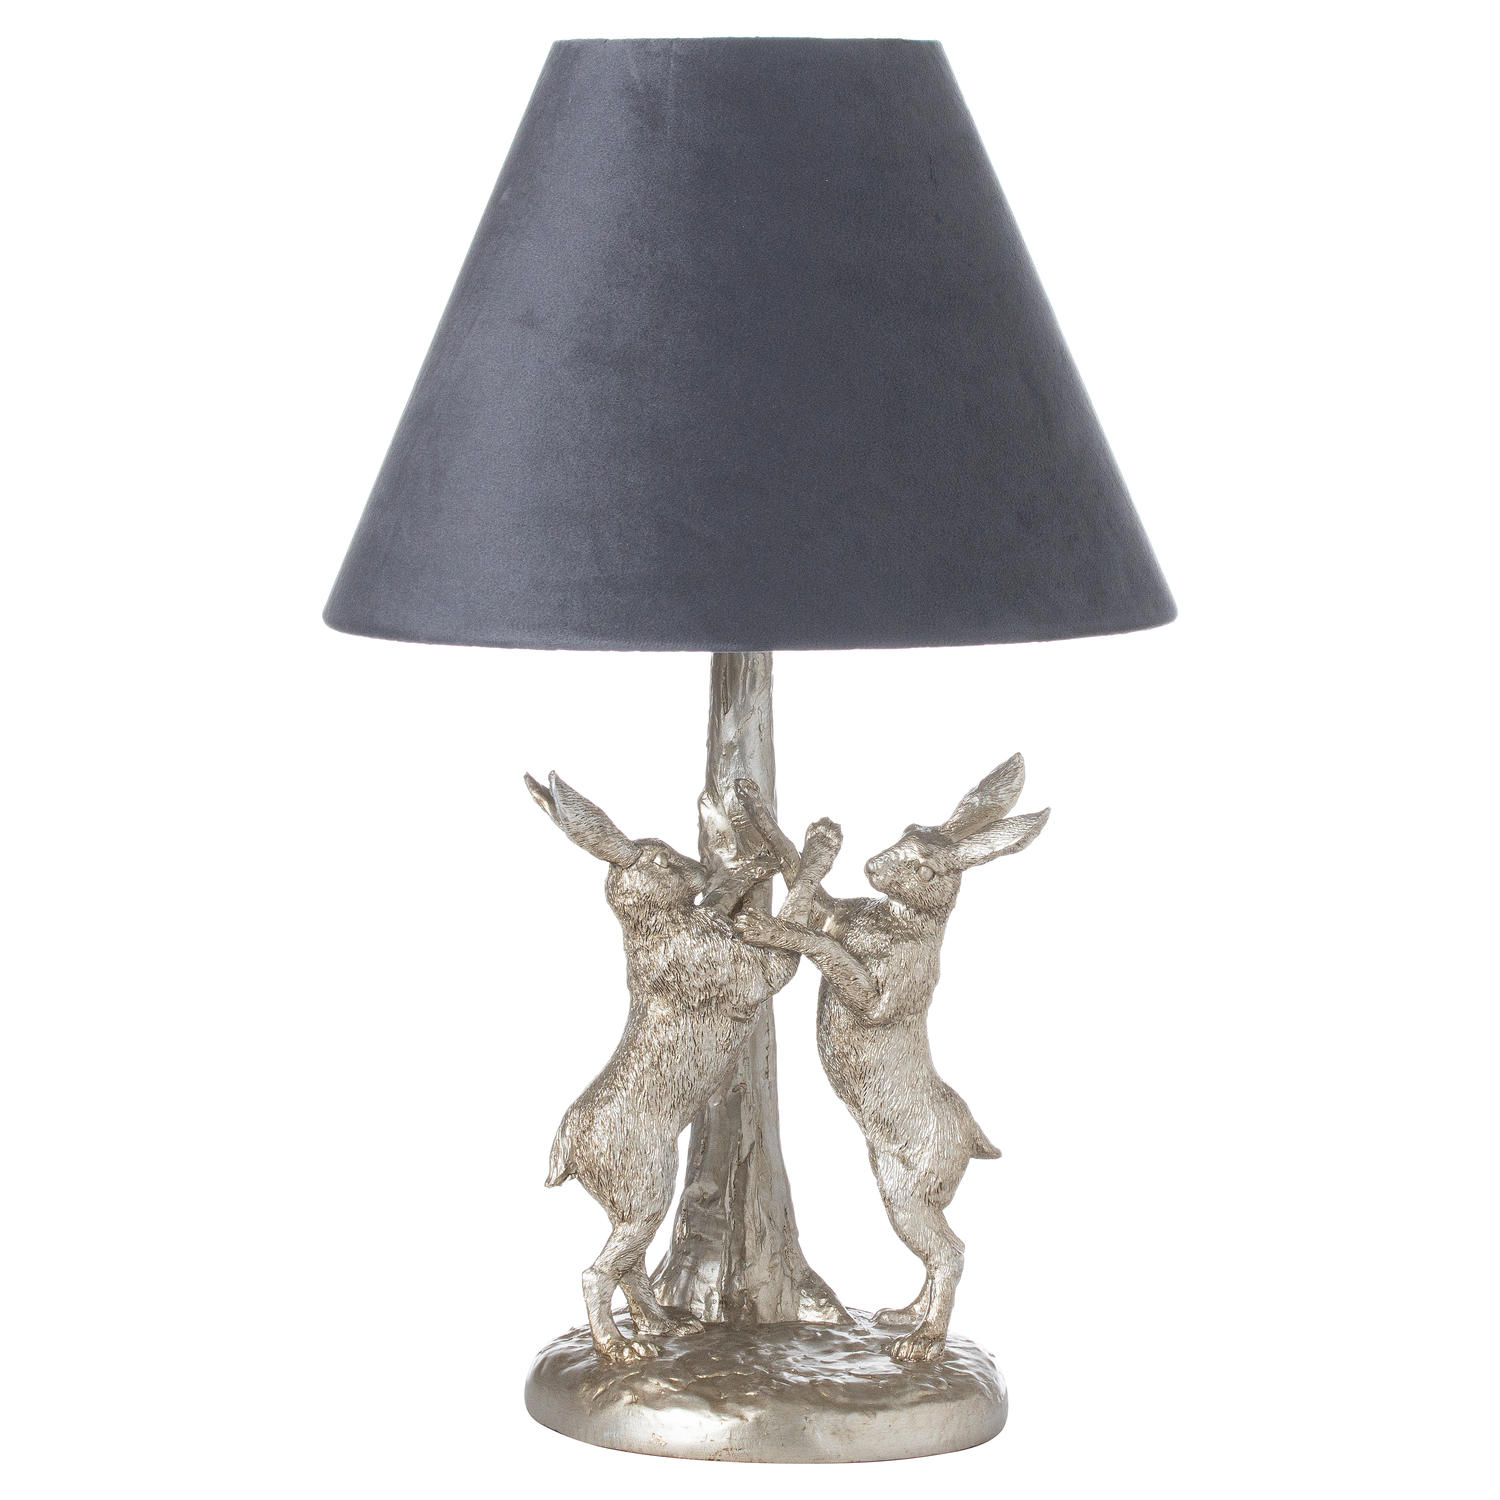 Antique Silver Marching Hares Lamp With Grey Velvet Shade - Image 1